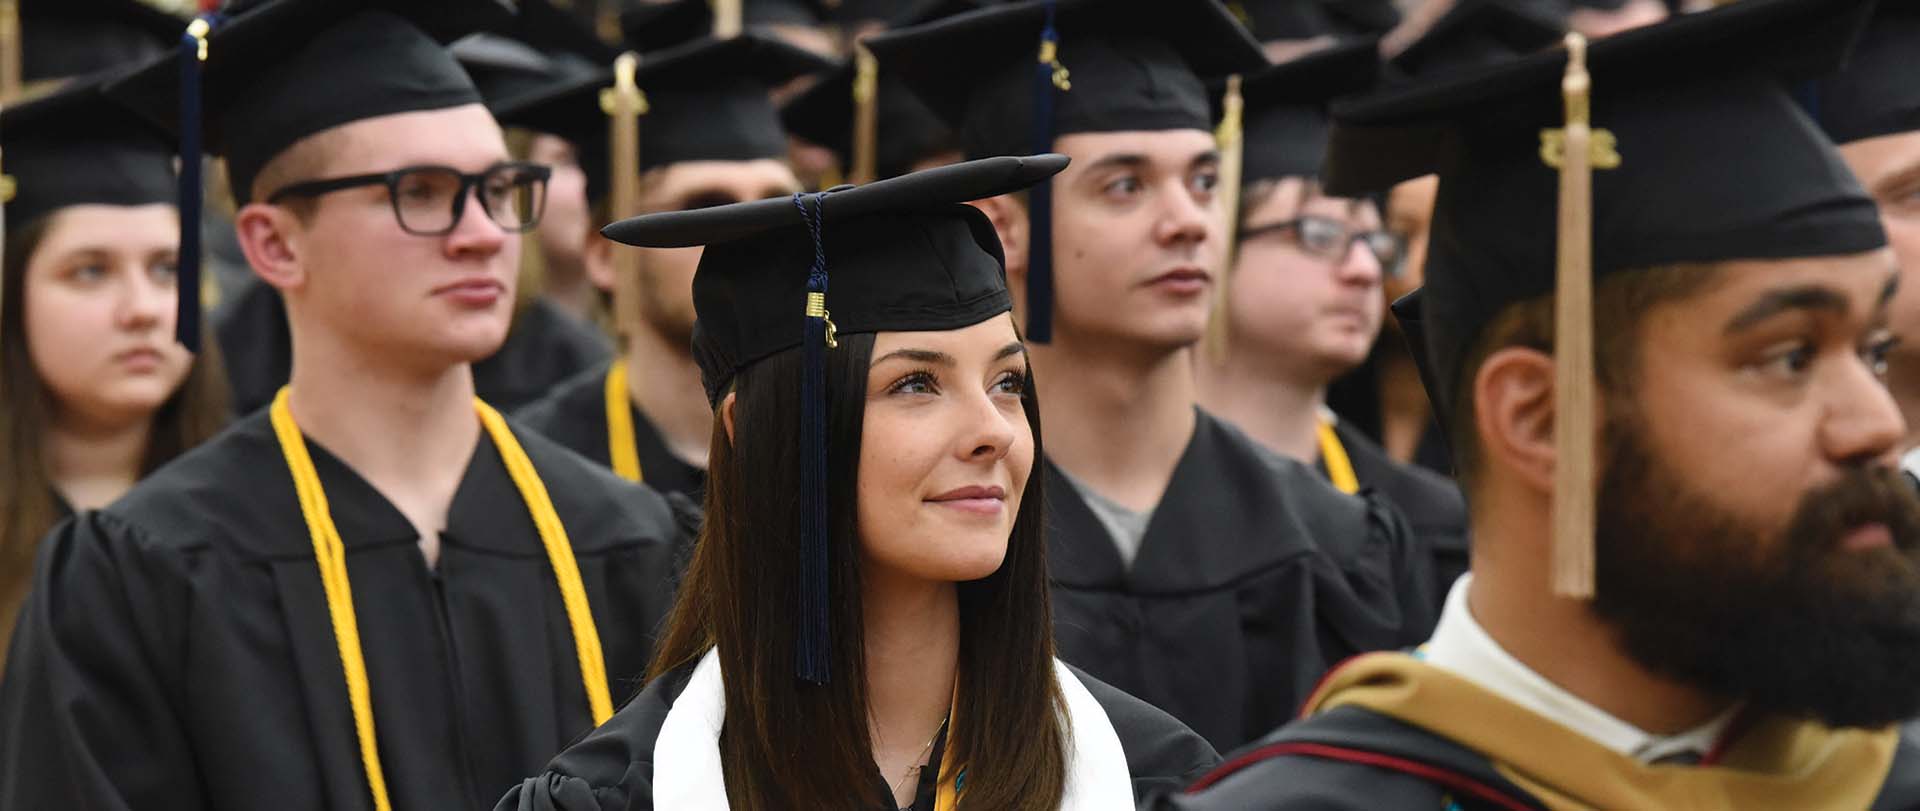 Students at Ferris commencement ceremony